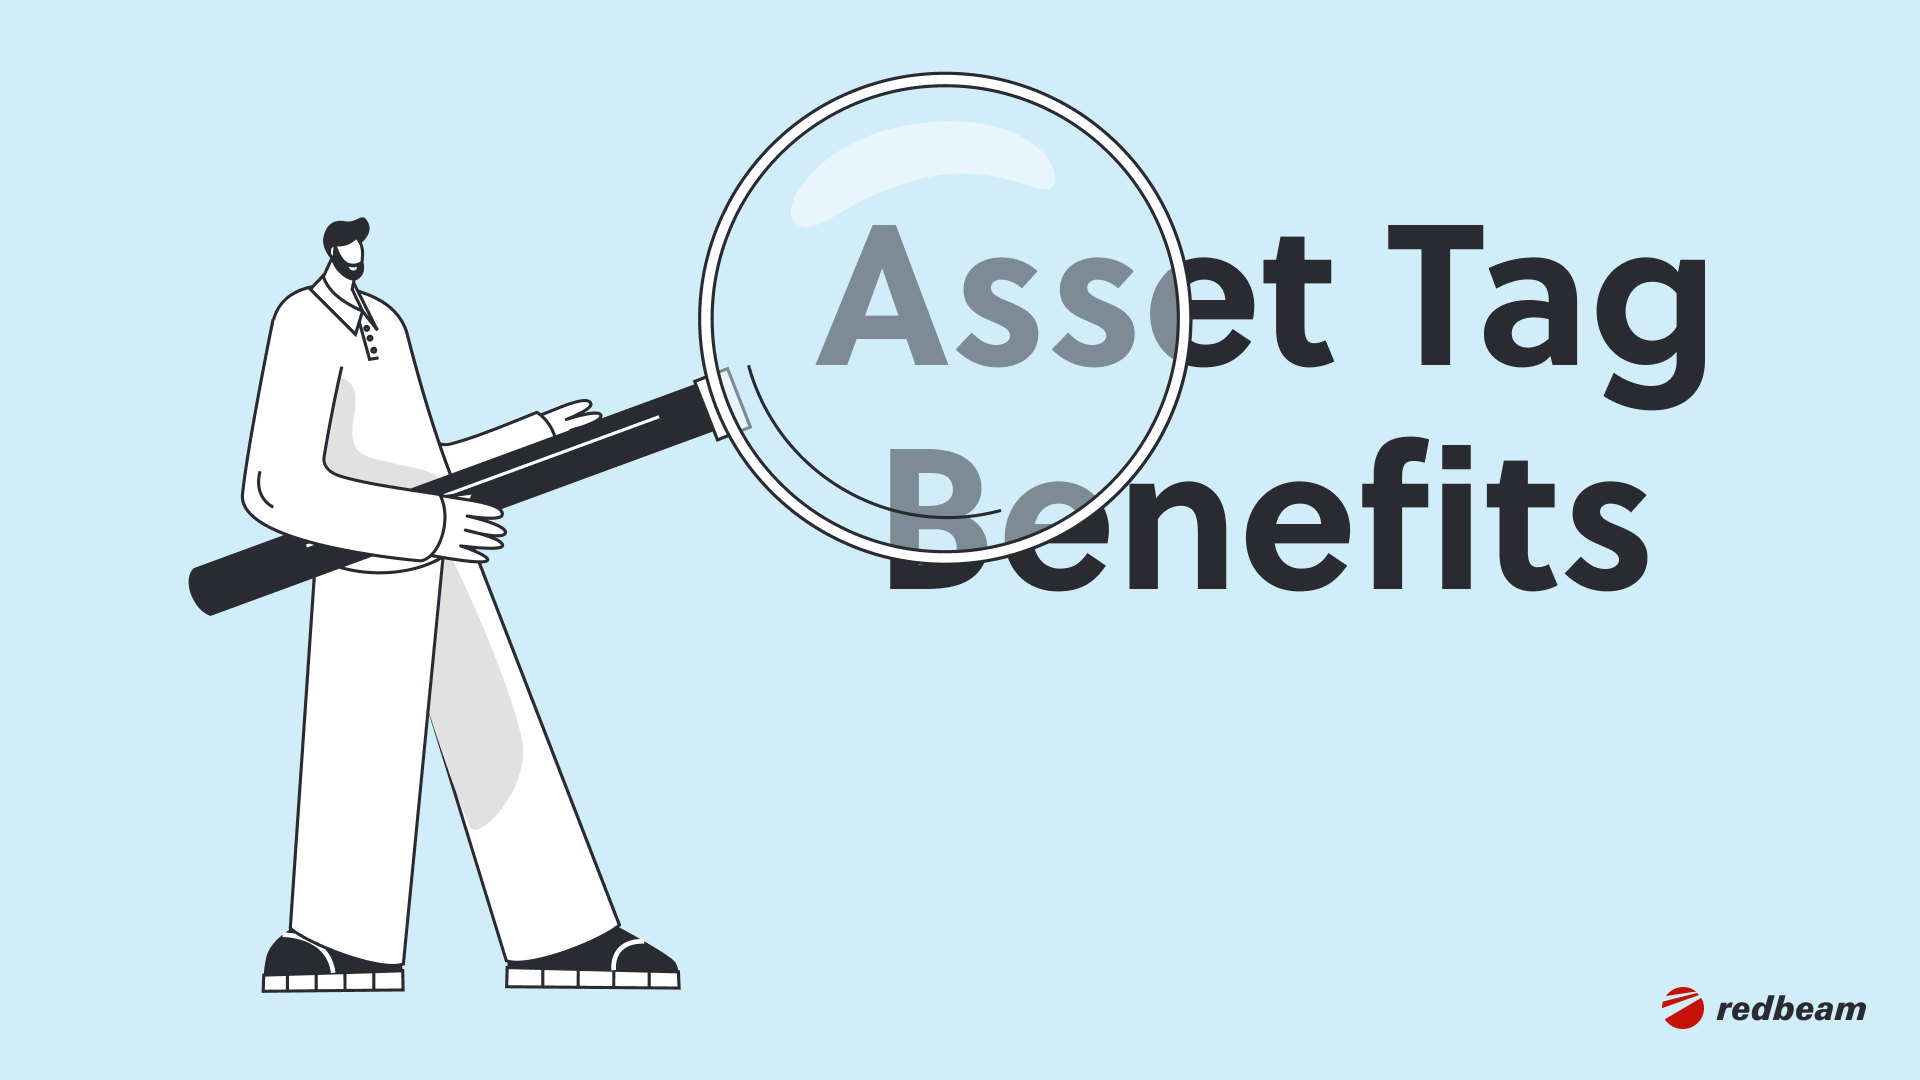 2.Benefits of Asset Tags